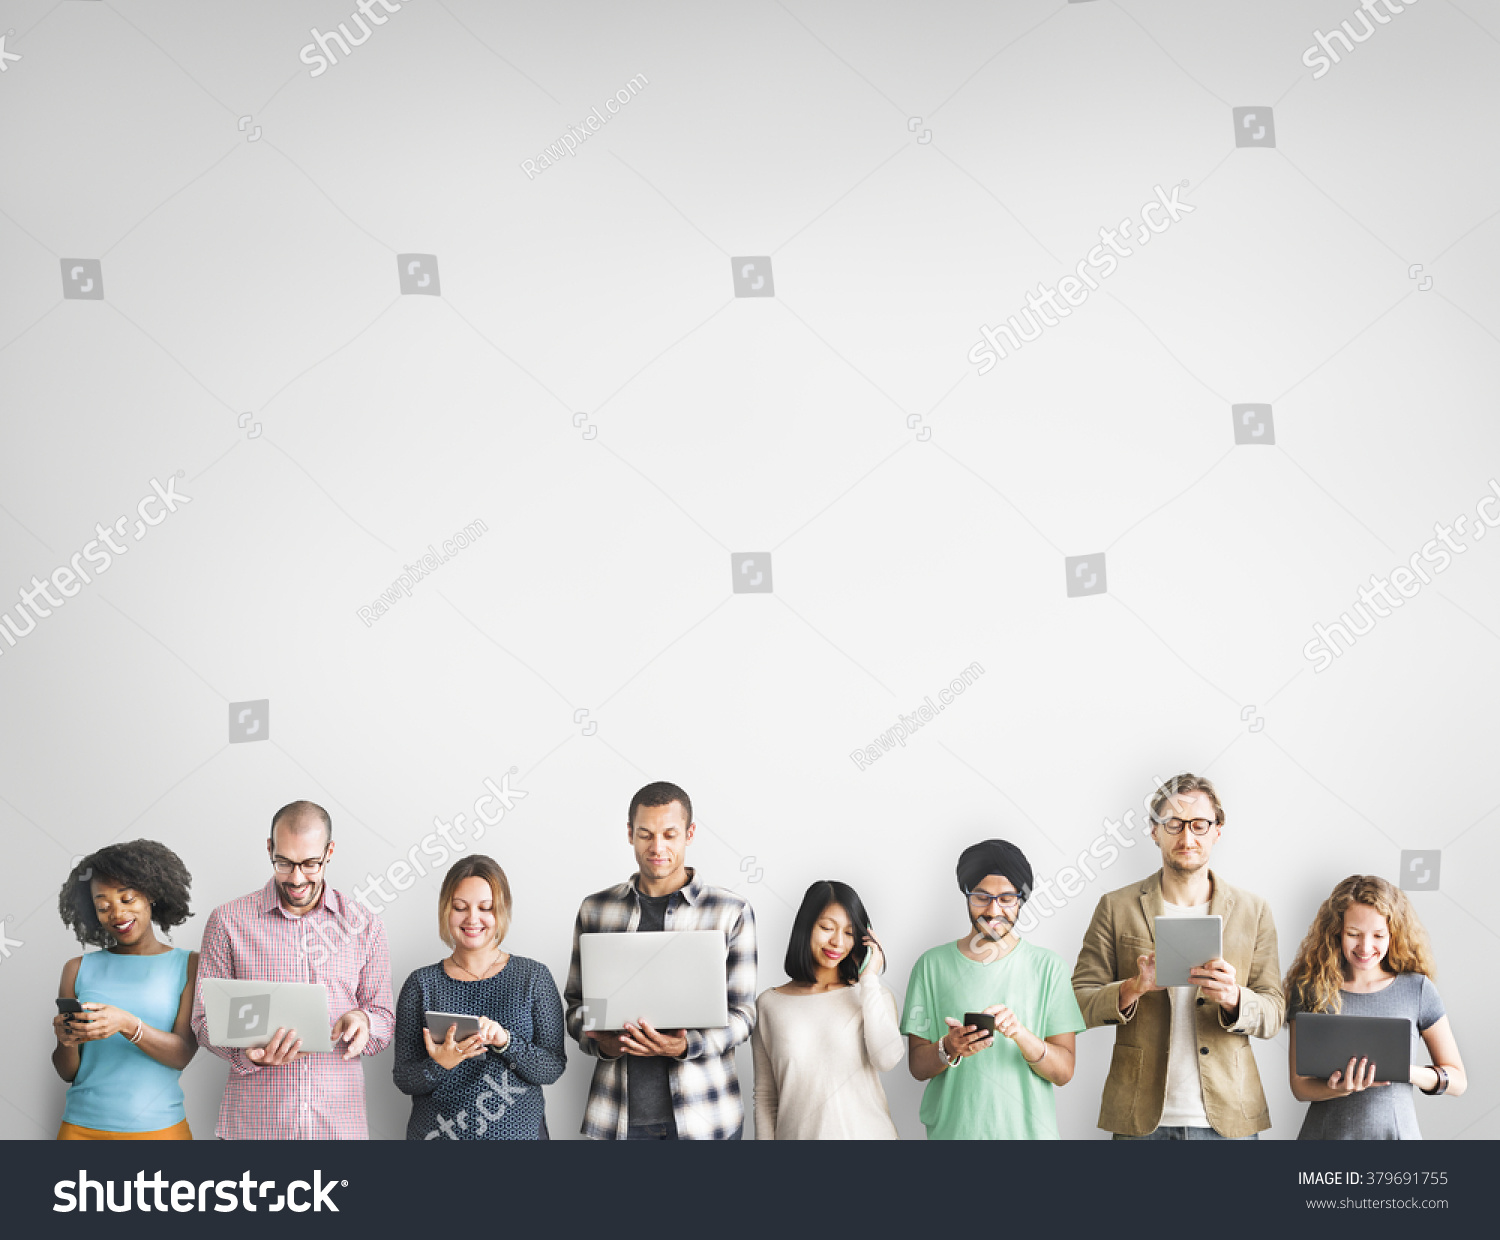 Group of People Connection Digital Device Concept #379691755